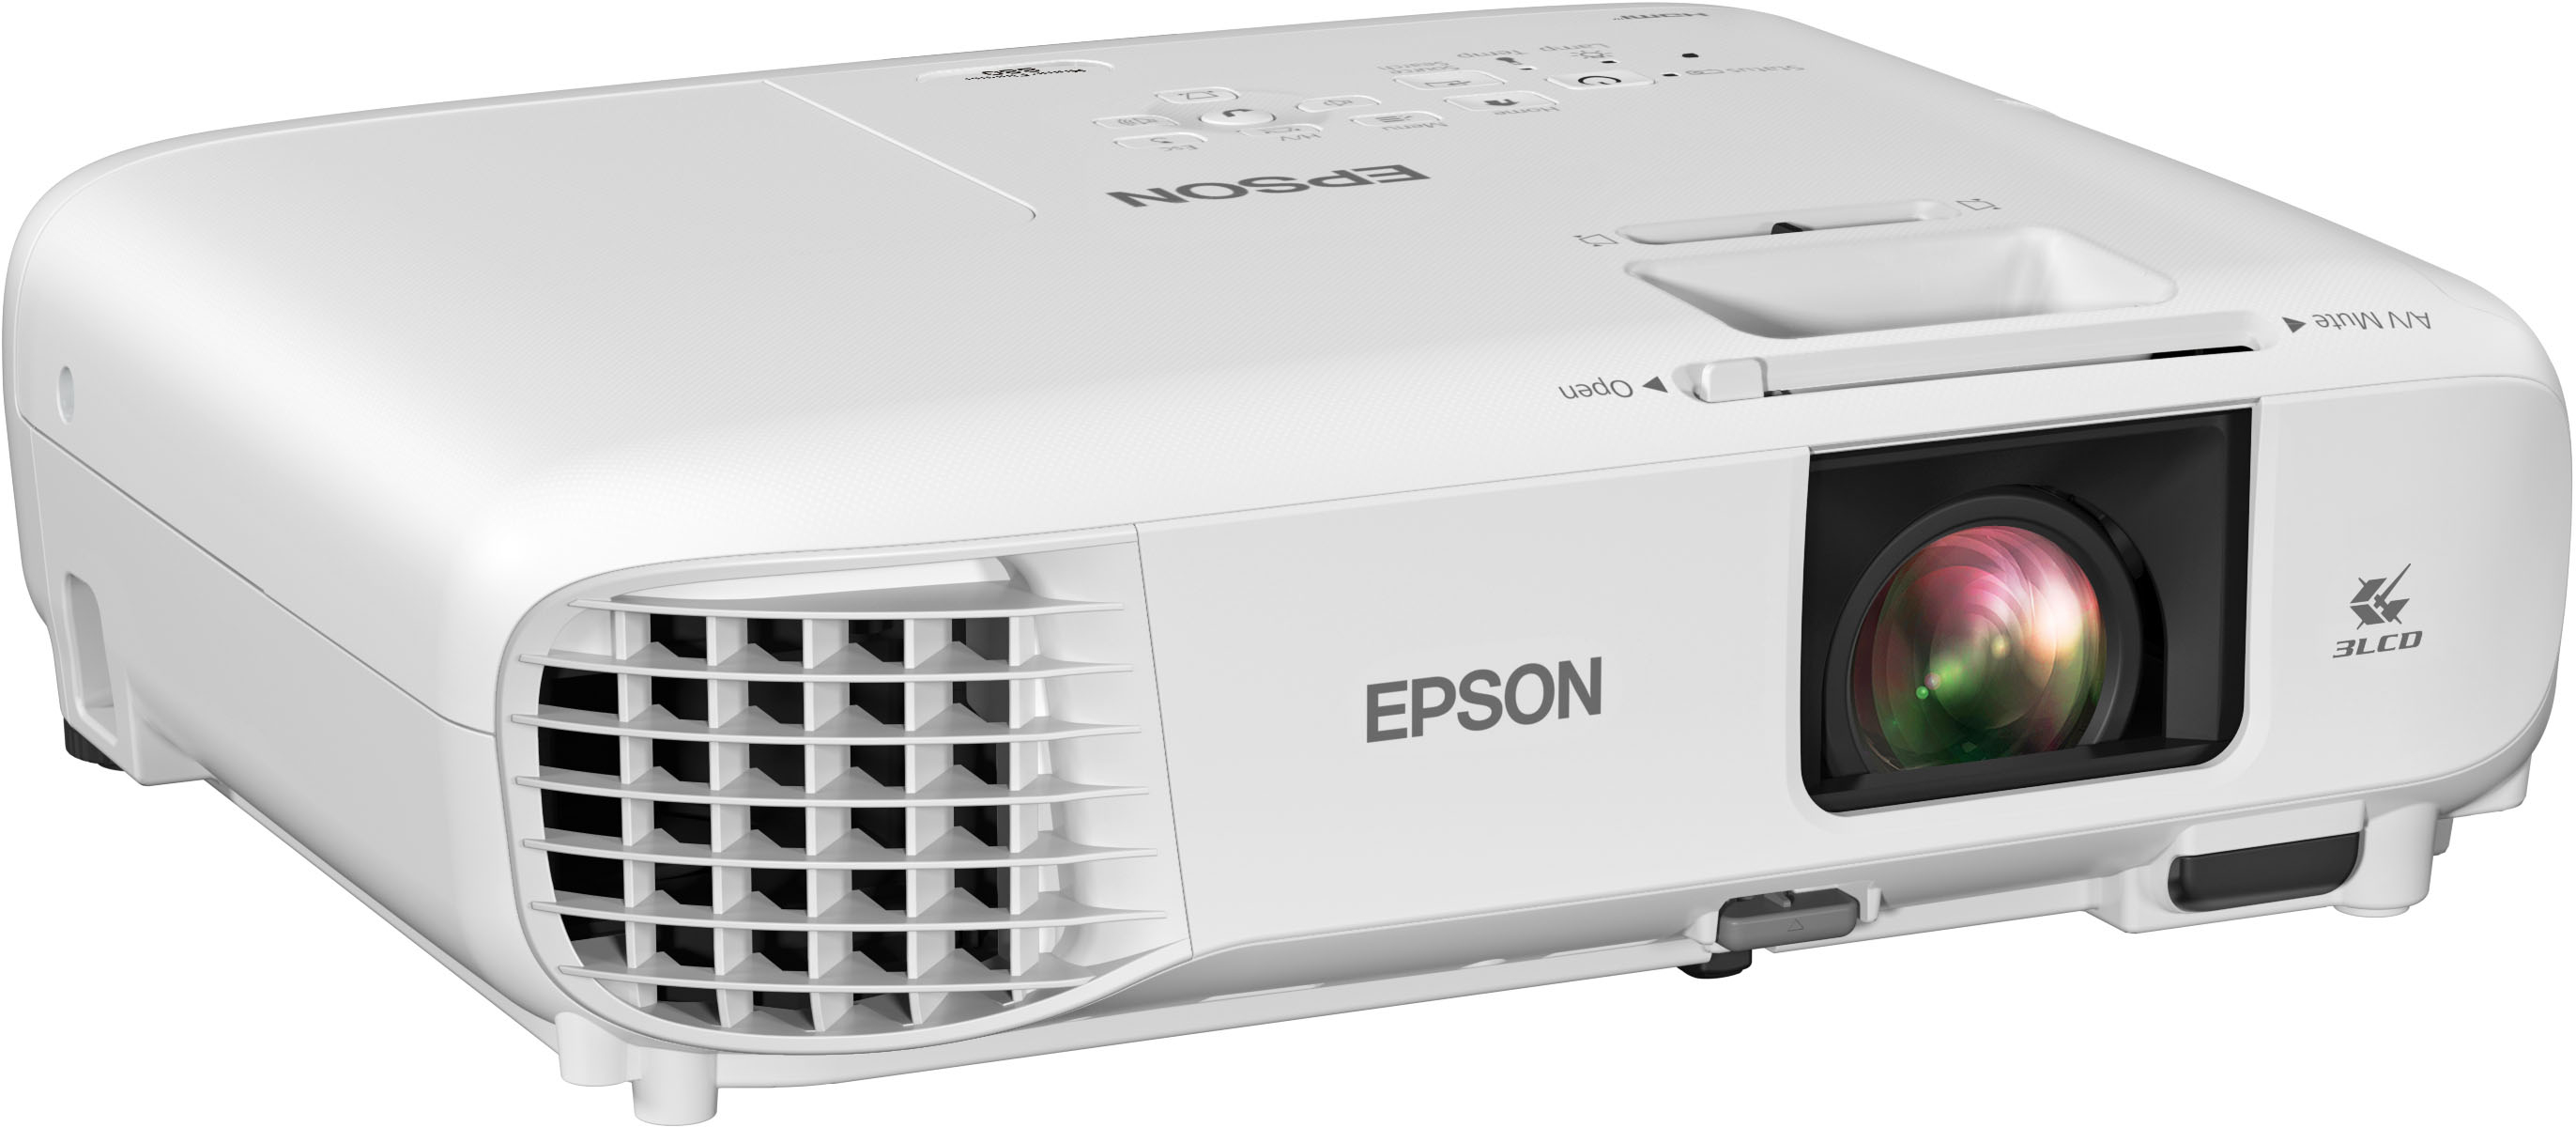 Angle View: Epson - Home Cinema 880 1080p 3LCD Projector - Certified Refurbished - White